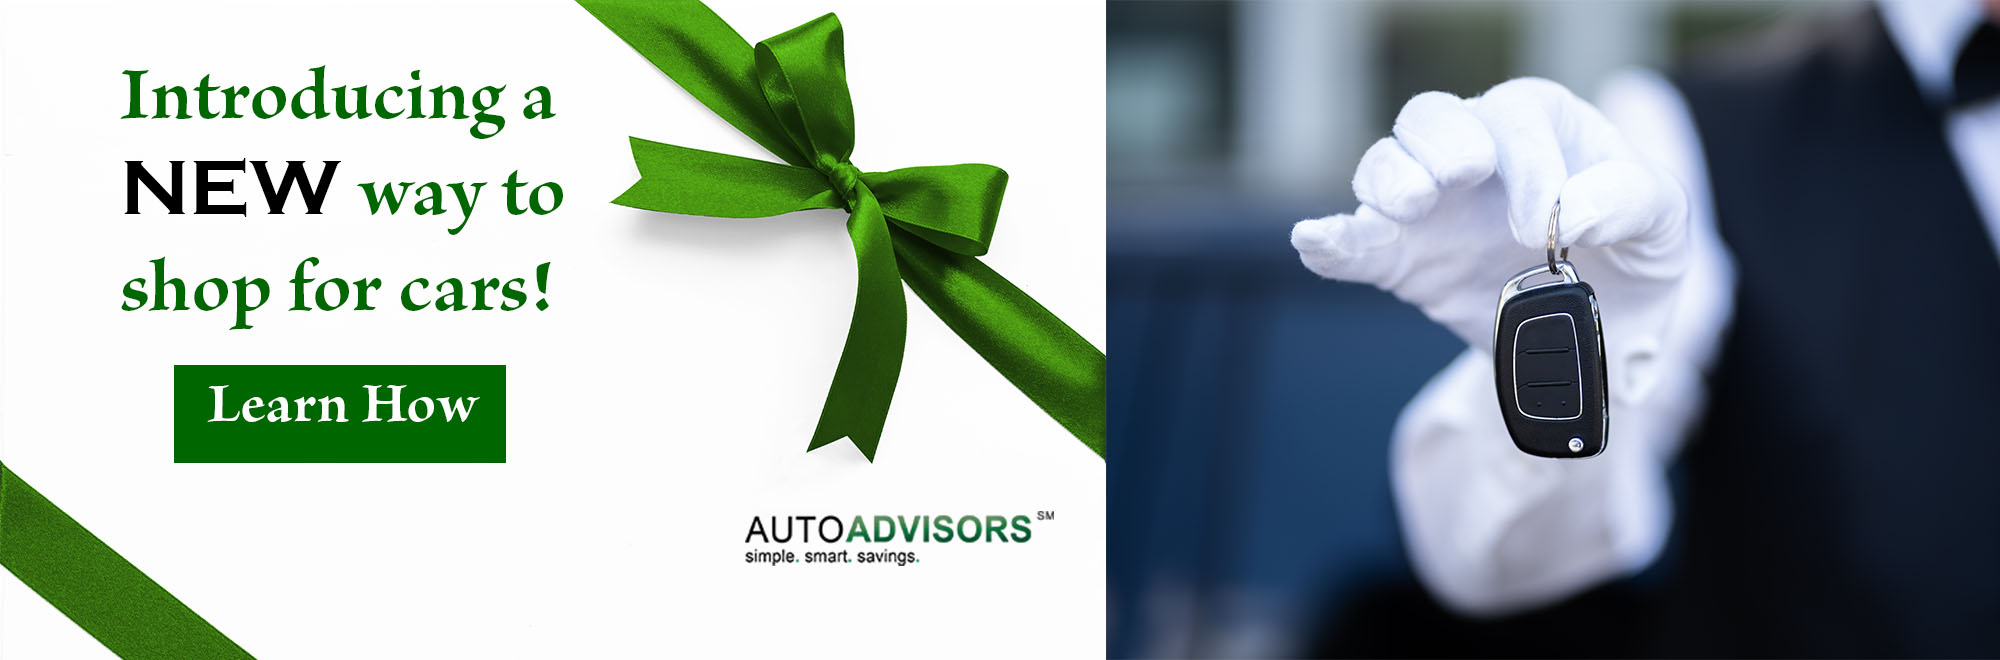 Introducing a new way to shop for cars. Learn how with Auto Advisors.